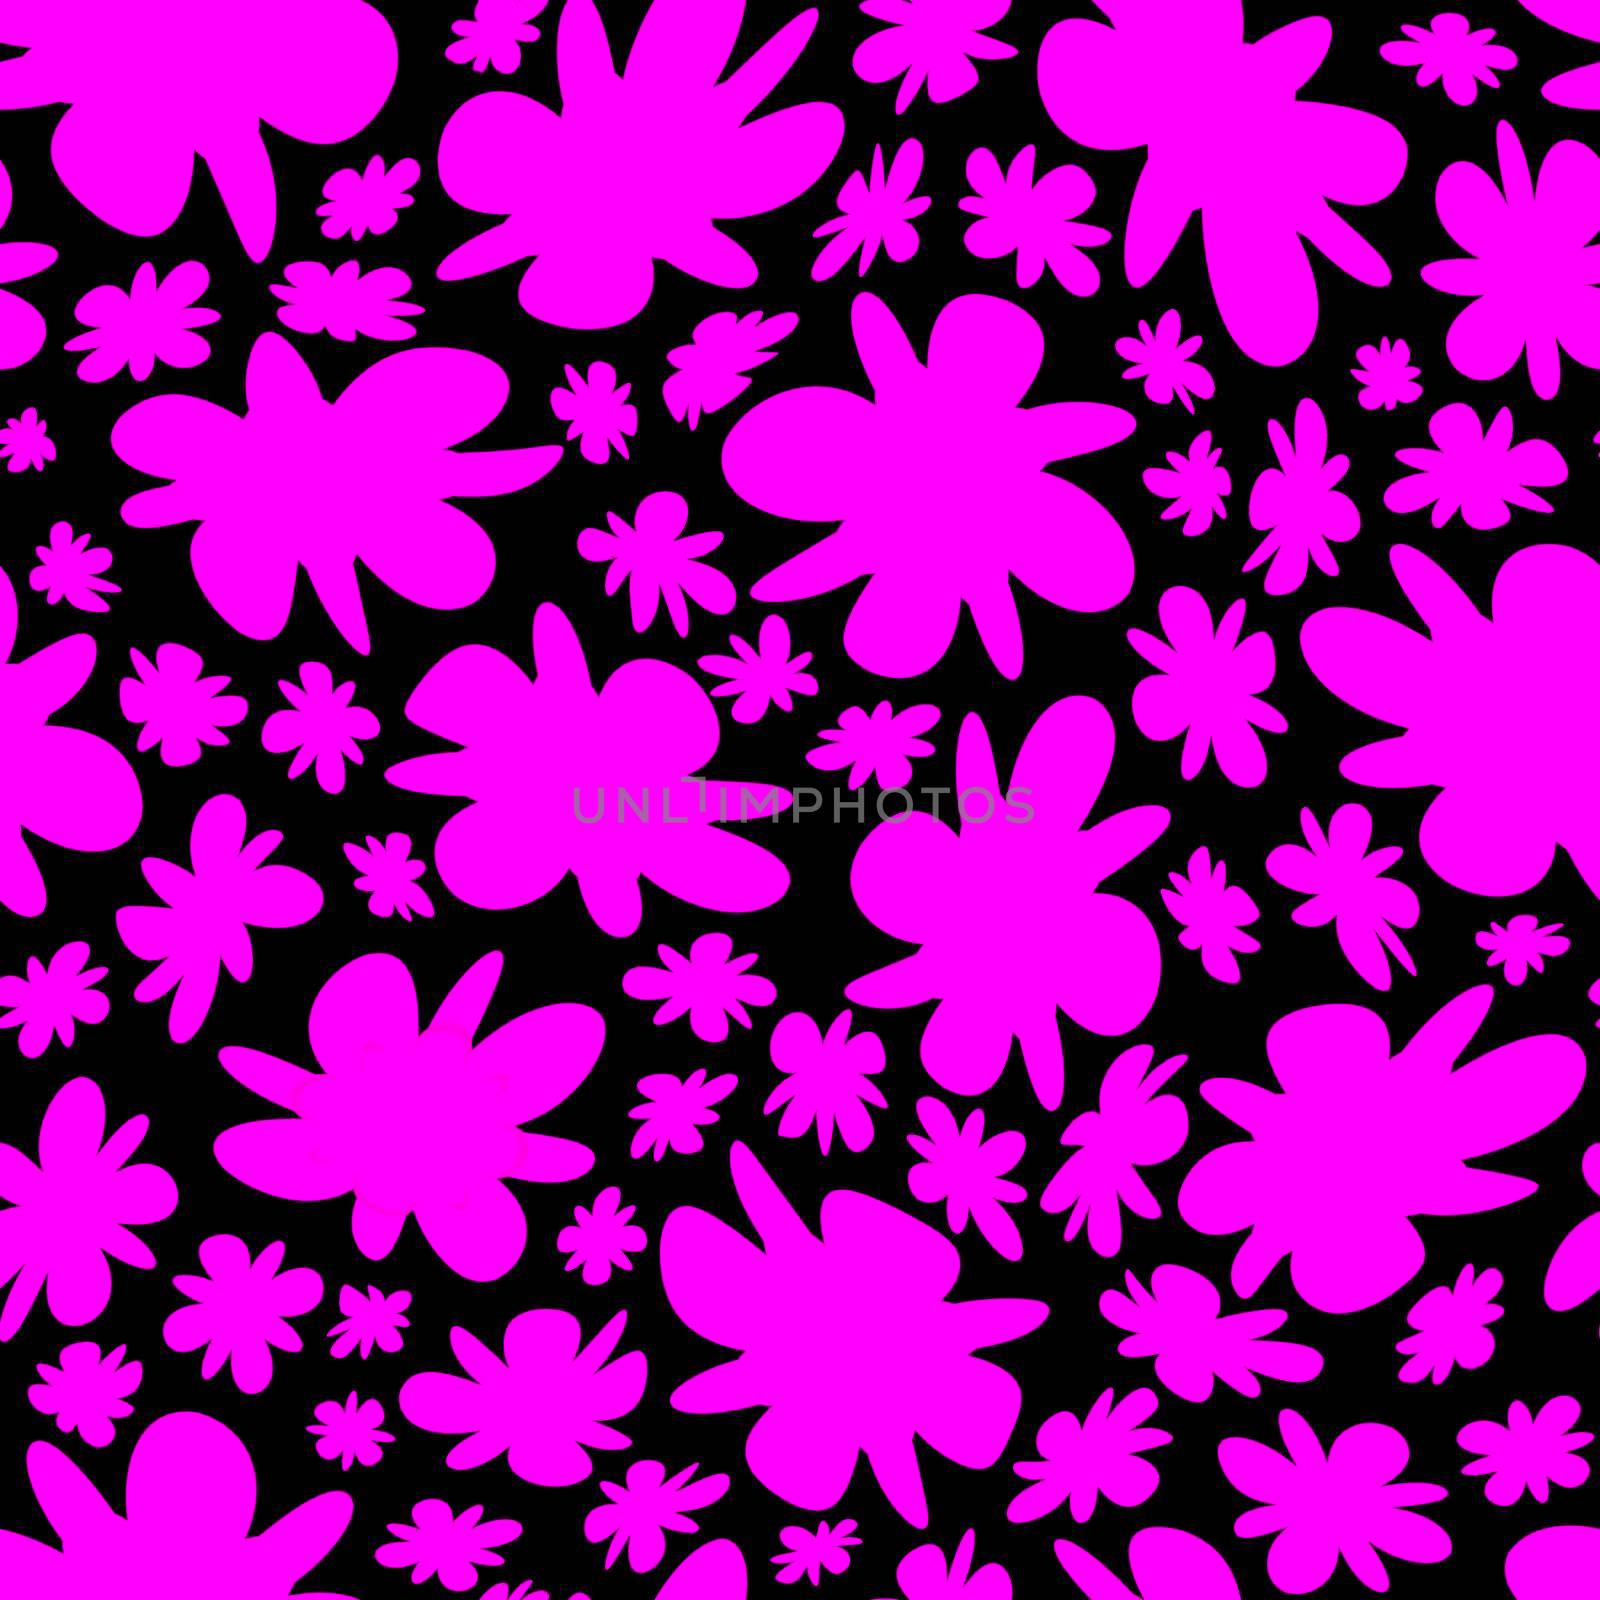 Trendy fabric pattern with miniature flowers.Summer print.Fashion design.Motifs scattered random.Elegant template for fashion prints.Good for fashion,textile,fabric,gift wrapping paper.Pink on black by Angelsmoon